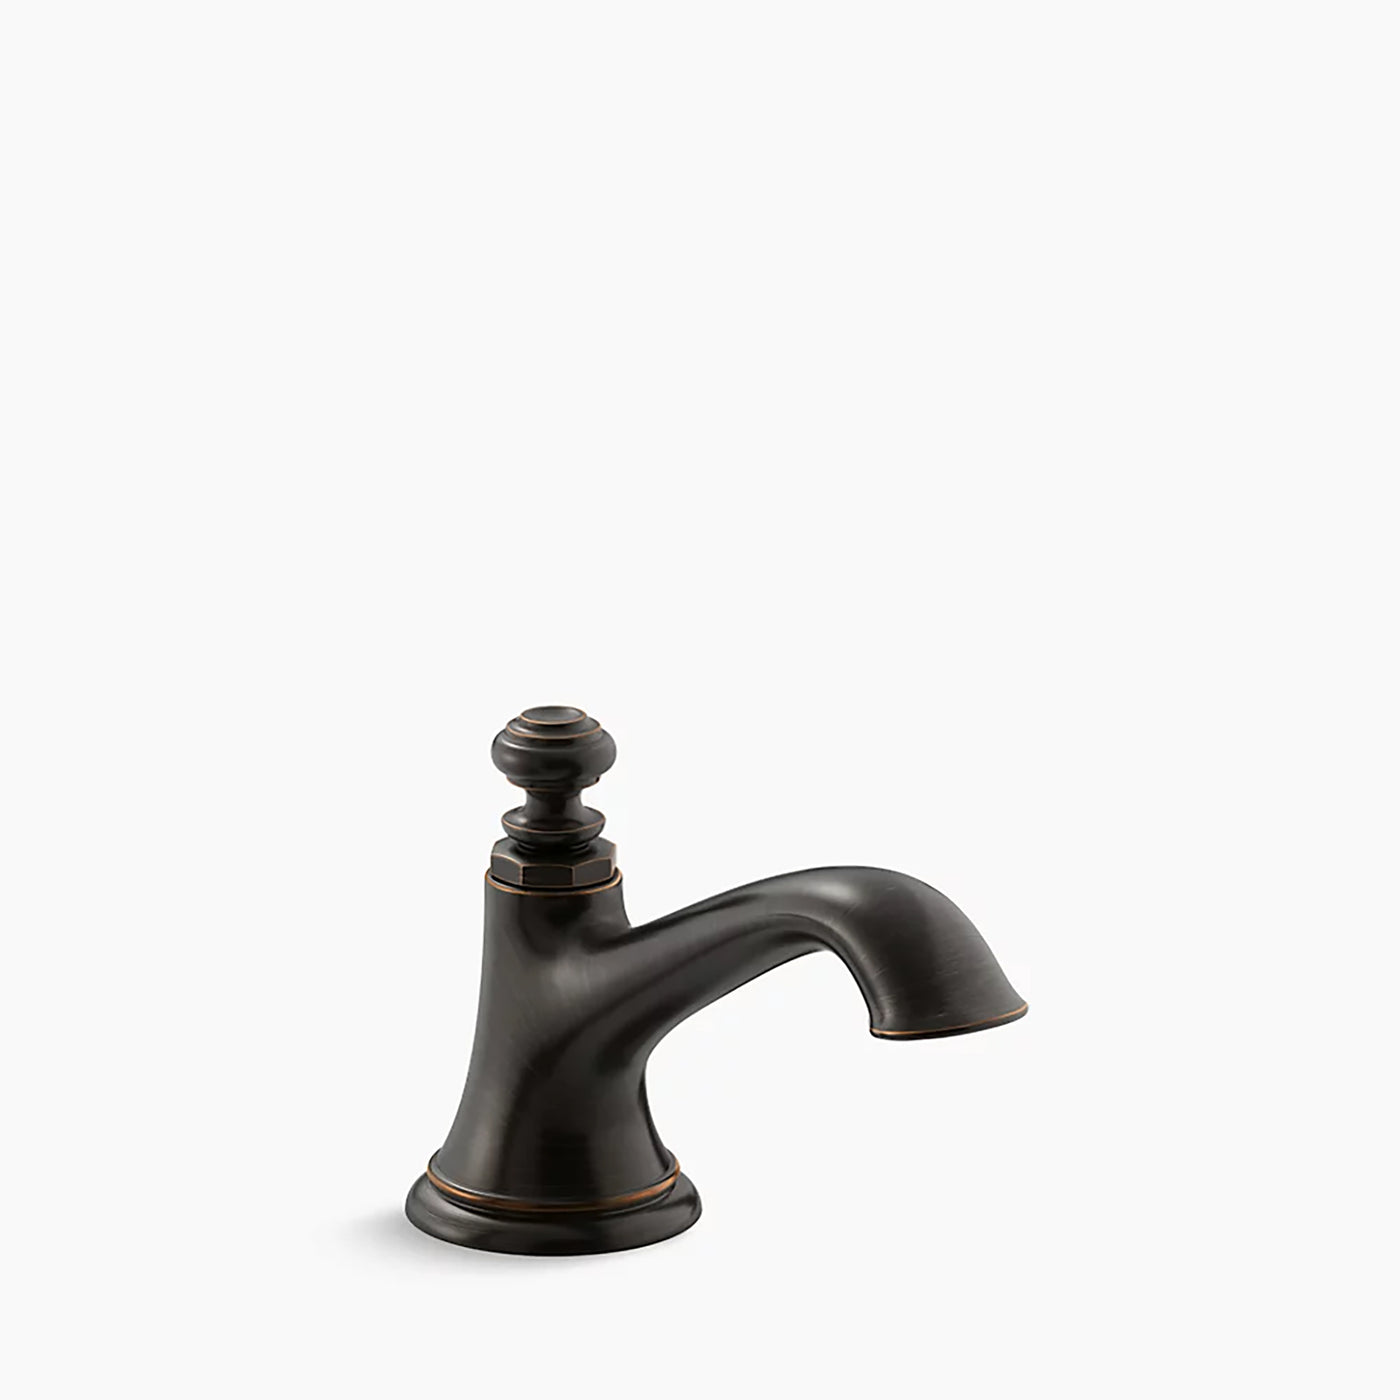 Artifacts® With Bell Design Bathroom Sink Faucet Spout